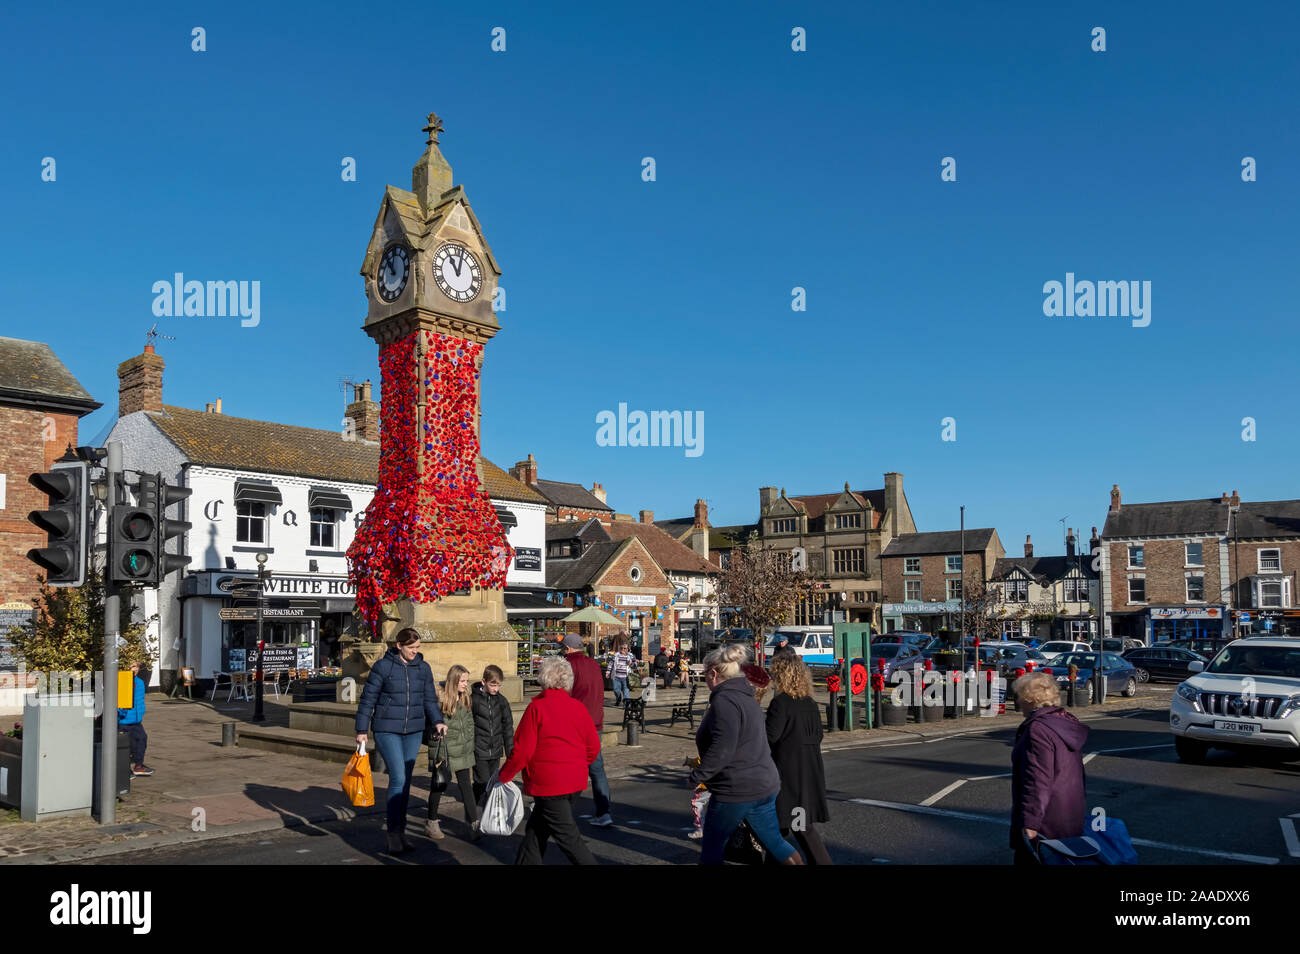 People using pelican crossing and Market Square clock decorated with knitted poppies for Remembrance Day Thirsk North Yorkshire England UK United King Stock Photo